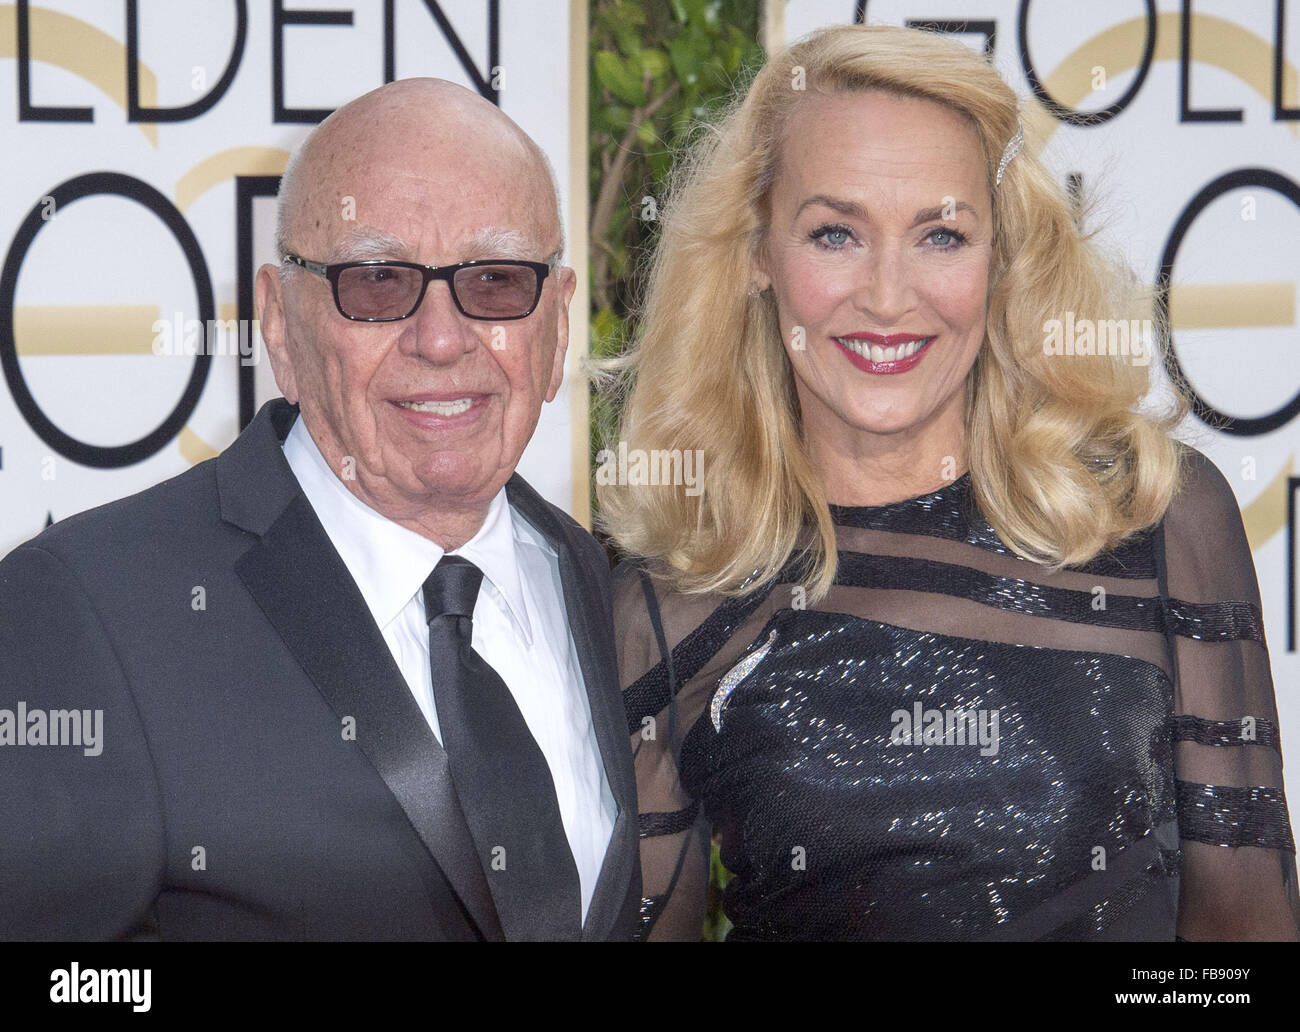 Beverly Hills, California, USA. 12th Jan, 2016. FILE PHOTO DATED: Jan 10, 2016 - RUPERT MURDOCH and JERRY HALL on the red carpet during arrivals for the 73rd Golden Globe Awards, held at The Beverly Hilton hotel. Murdoch and Hall announced their engagement. Credit:  David Bro/ZUMA Wire/Alamy Live News Stock Photo